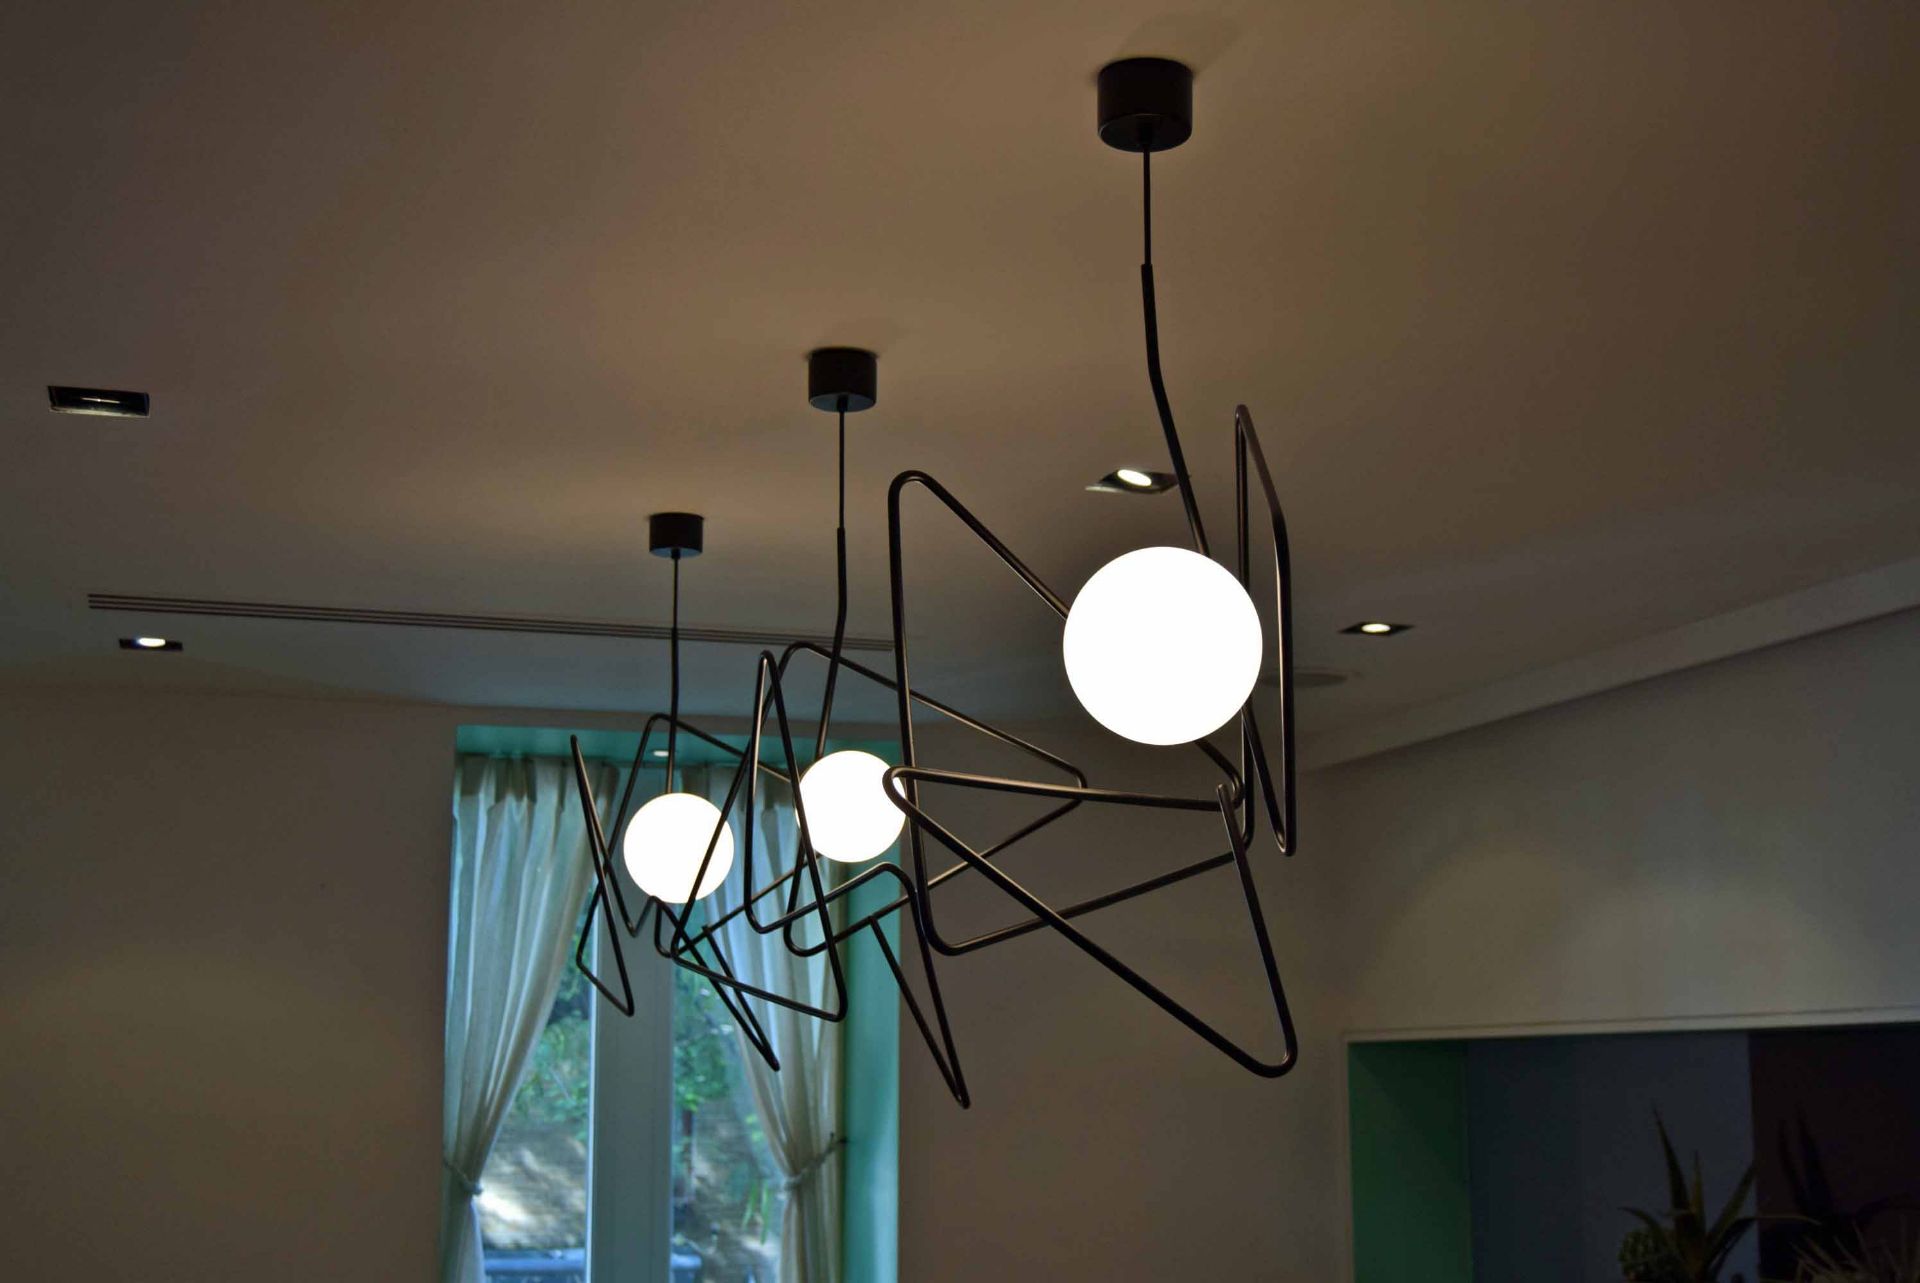 Three Abstract Design Globe Pendant Lights (Risk Assessment and Method Statement are required for